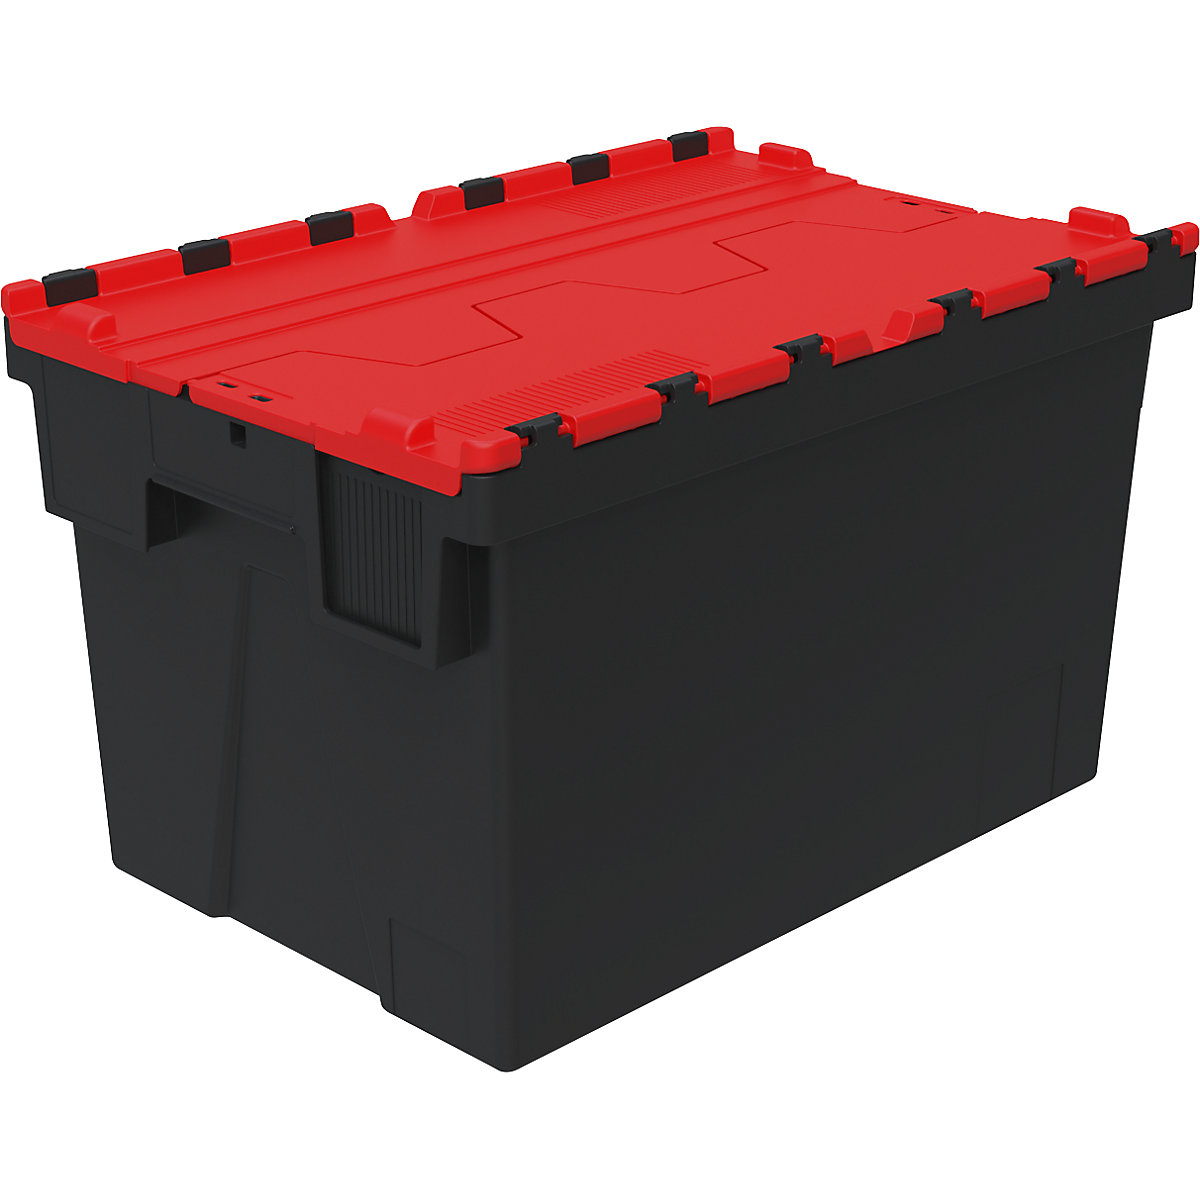 Reusable stacking container, LxWxH 600 x 400 x 367 mm, black/red-5